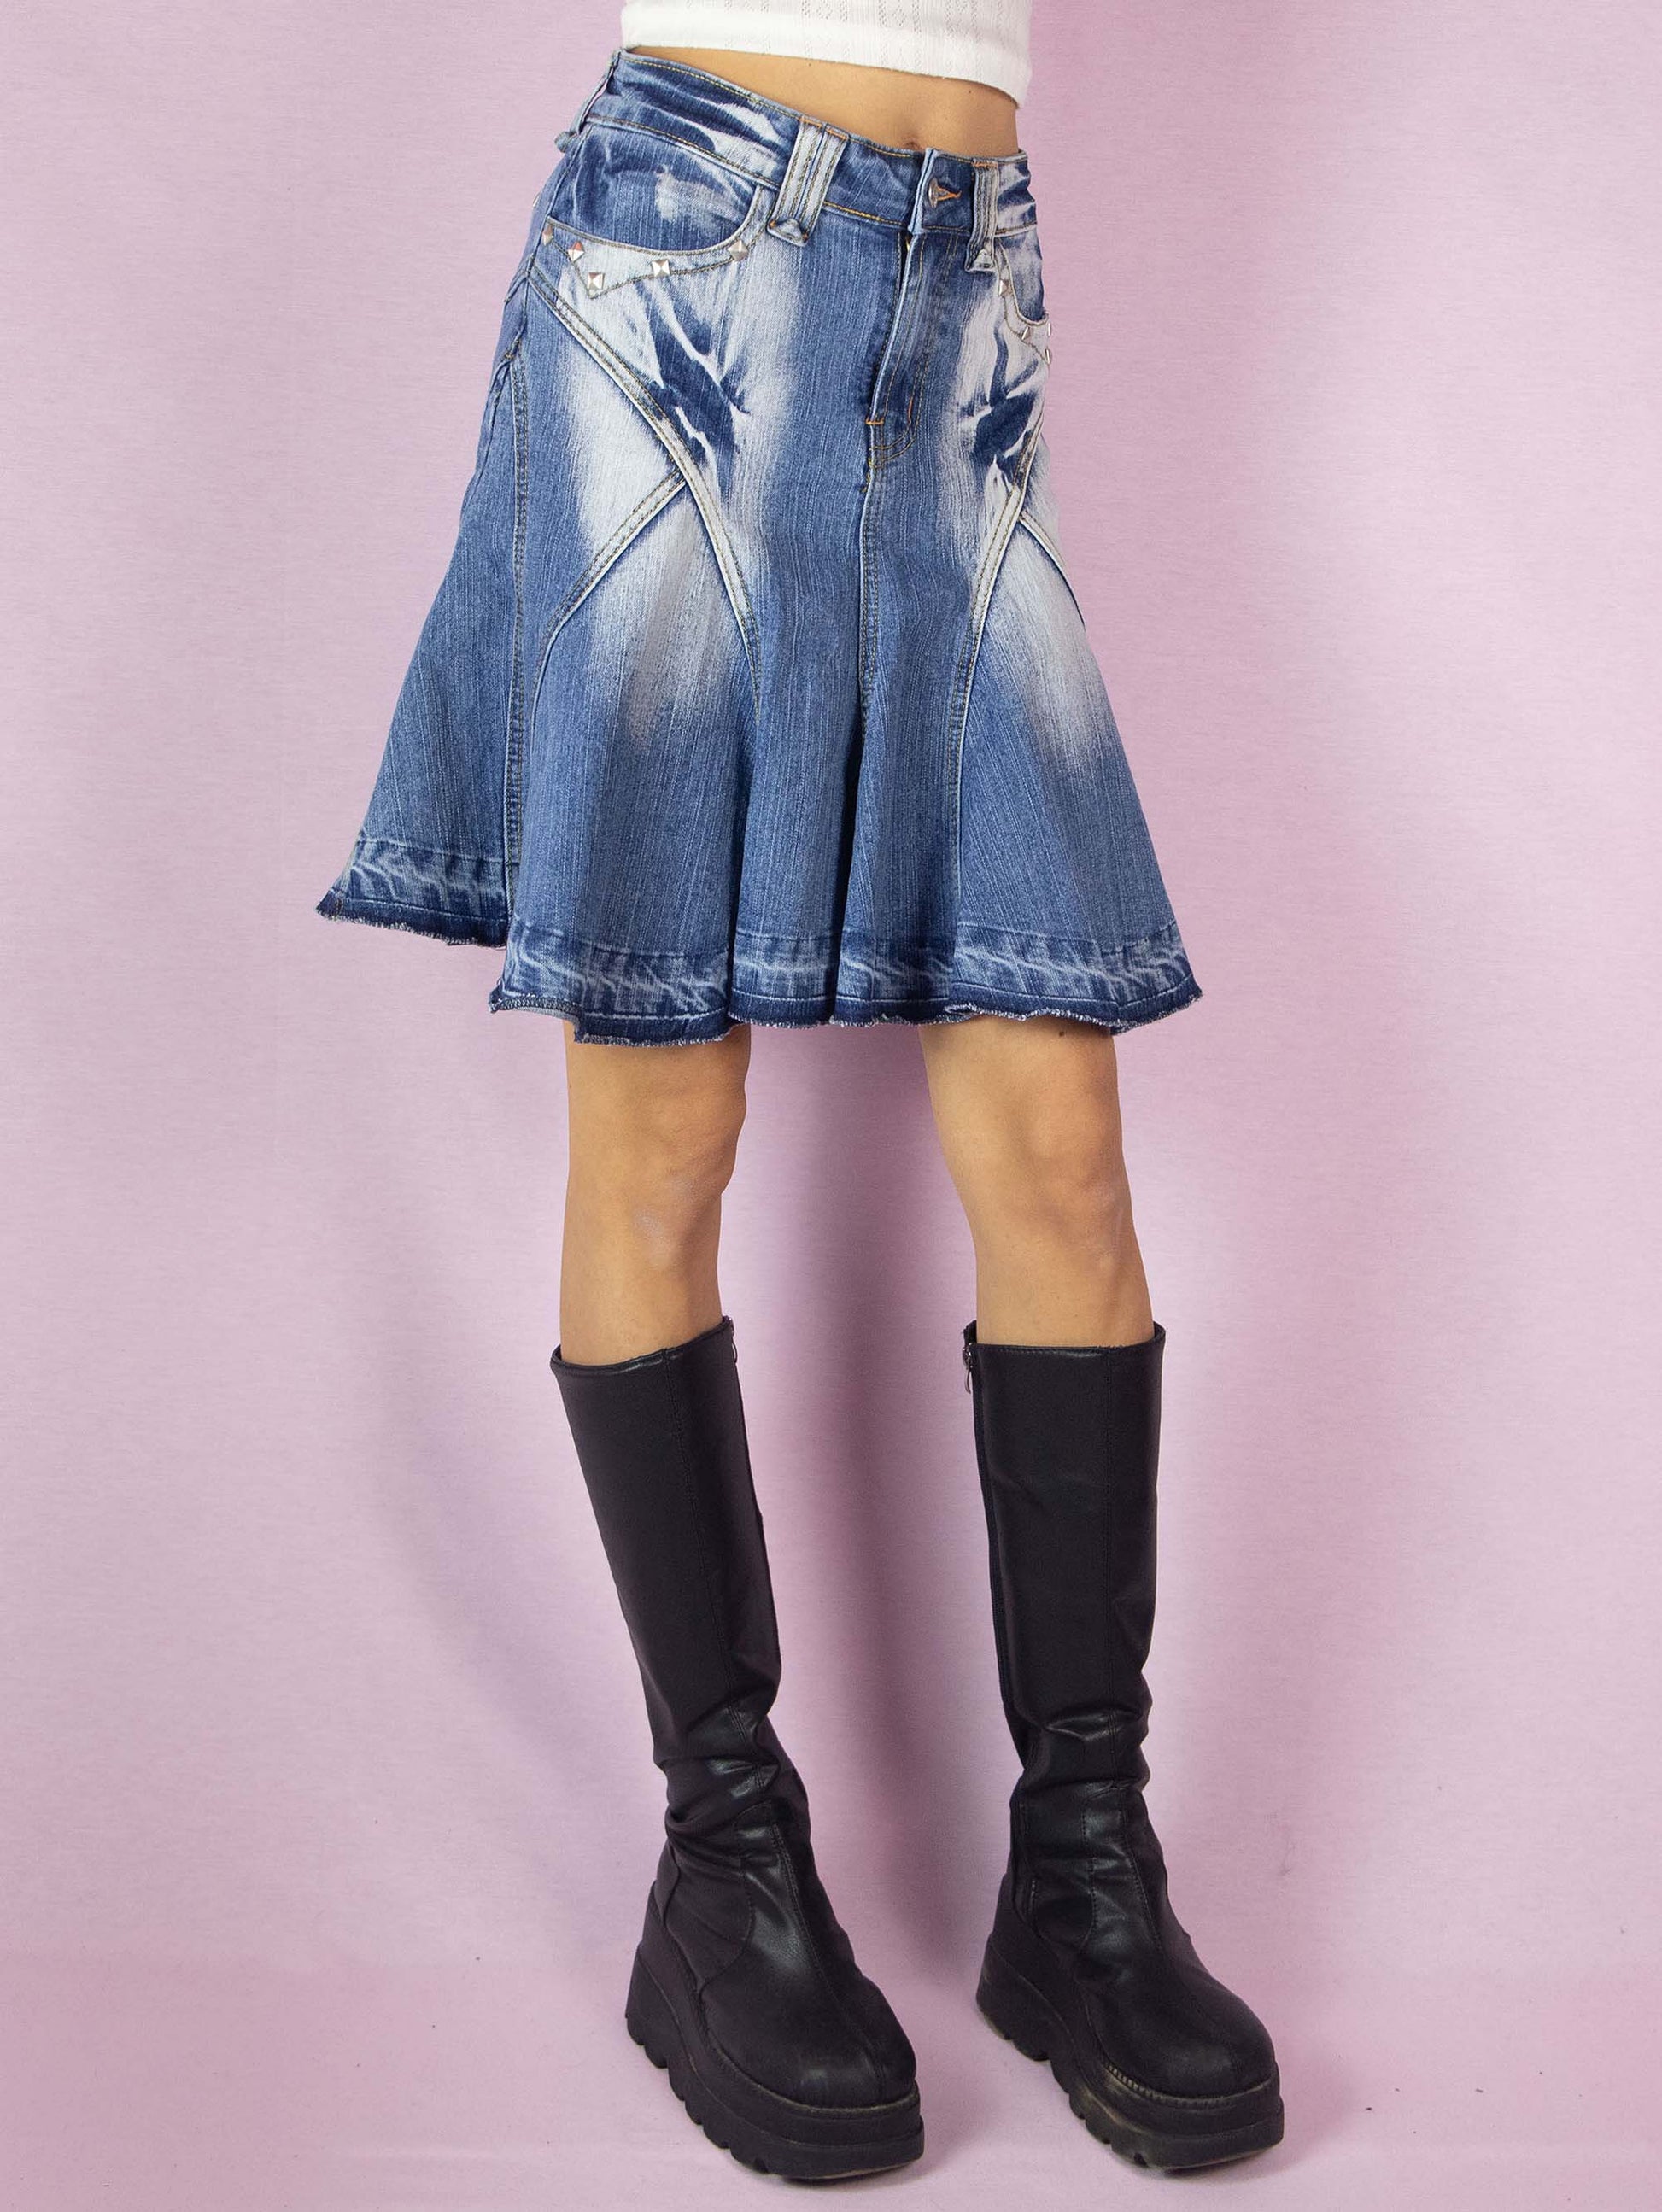 The Y2K Denim Godet Trumpet Skirt is a vintage 2000s subversive deconstructed inspired jean mini skirt featuring acid wash and stud details, a raw hem, pockets, and a front zipper closure.